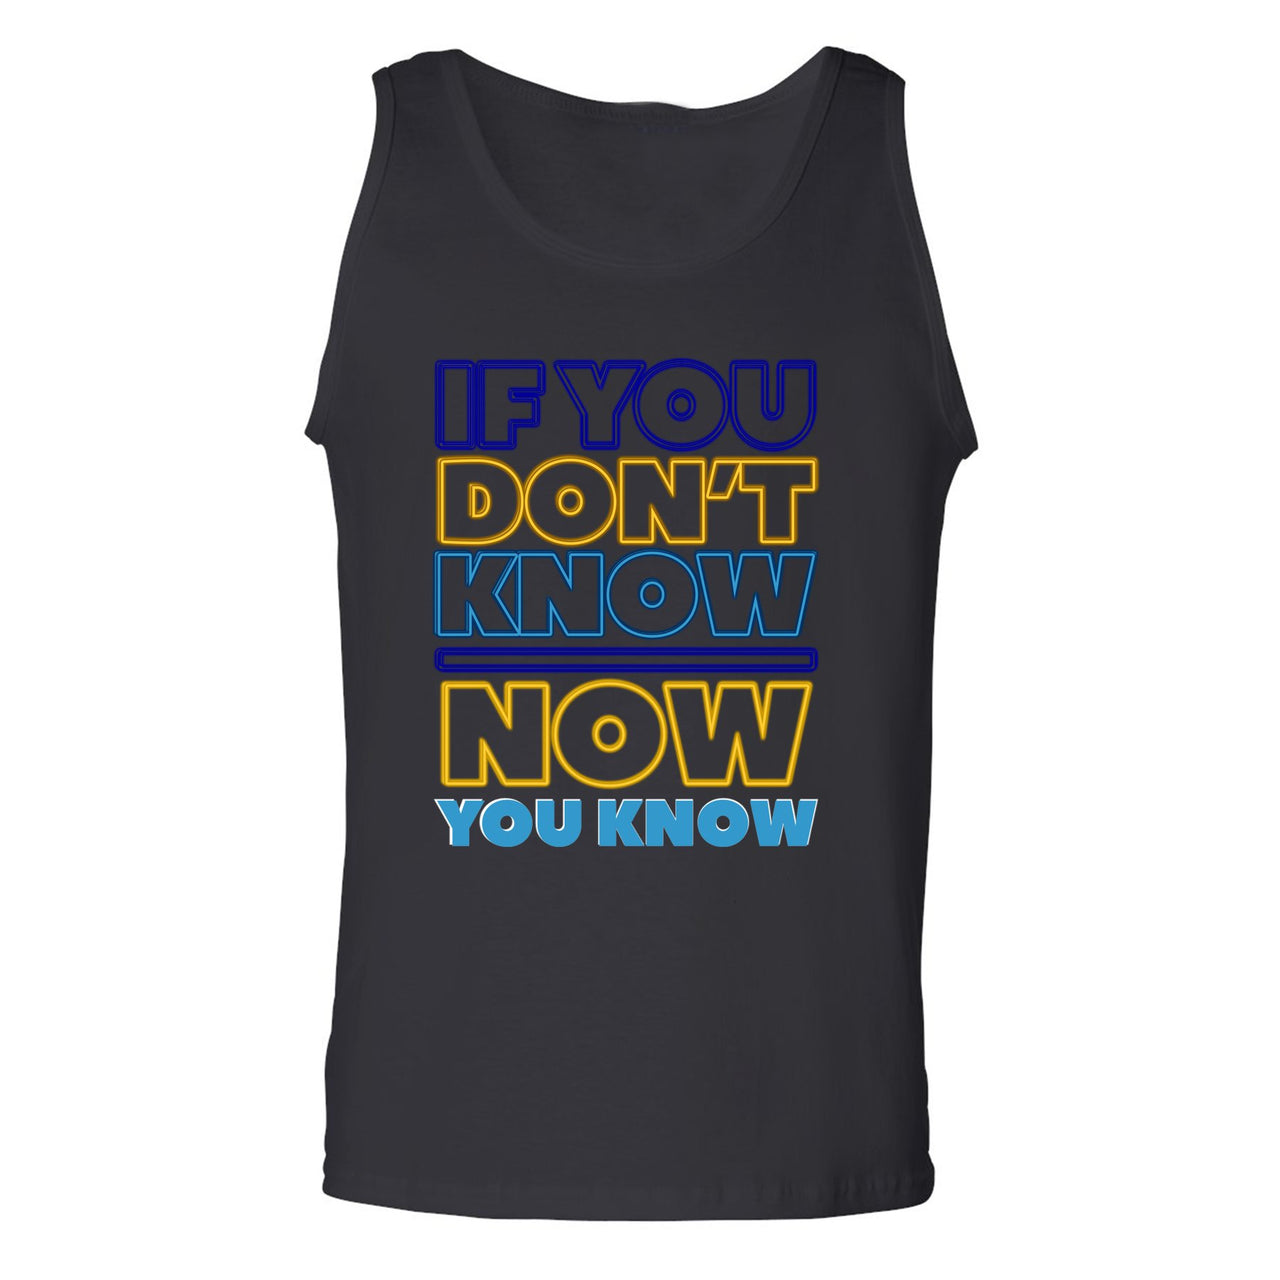 White Aqua 8s Mens Tank Top | If You Don't Know Now You Know, Black